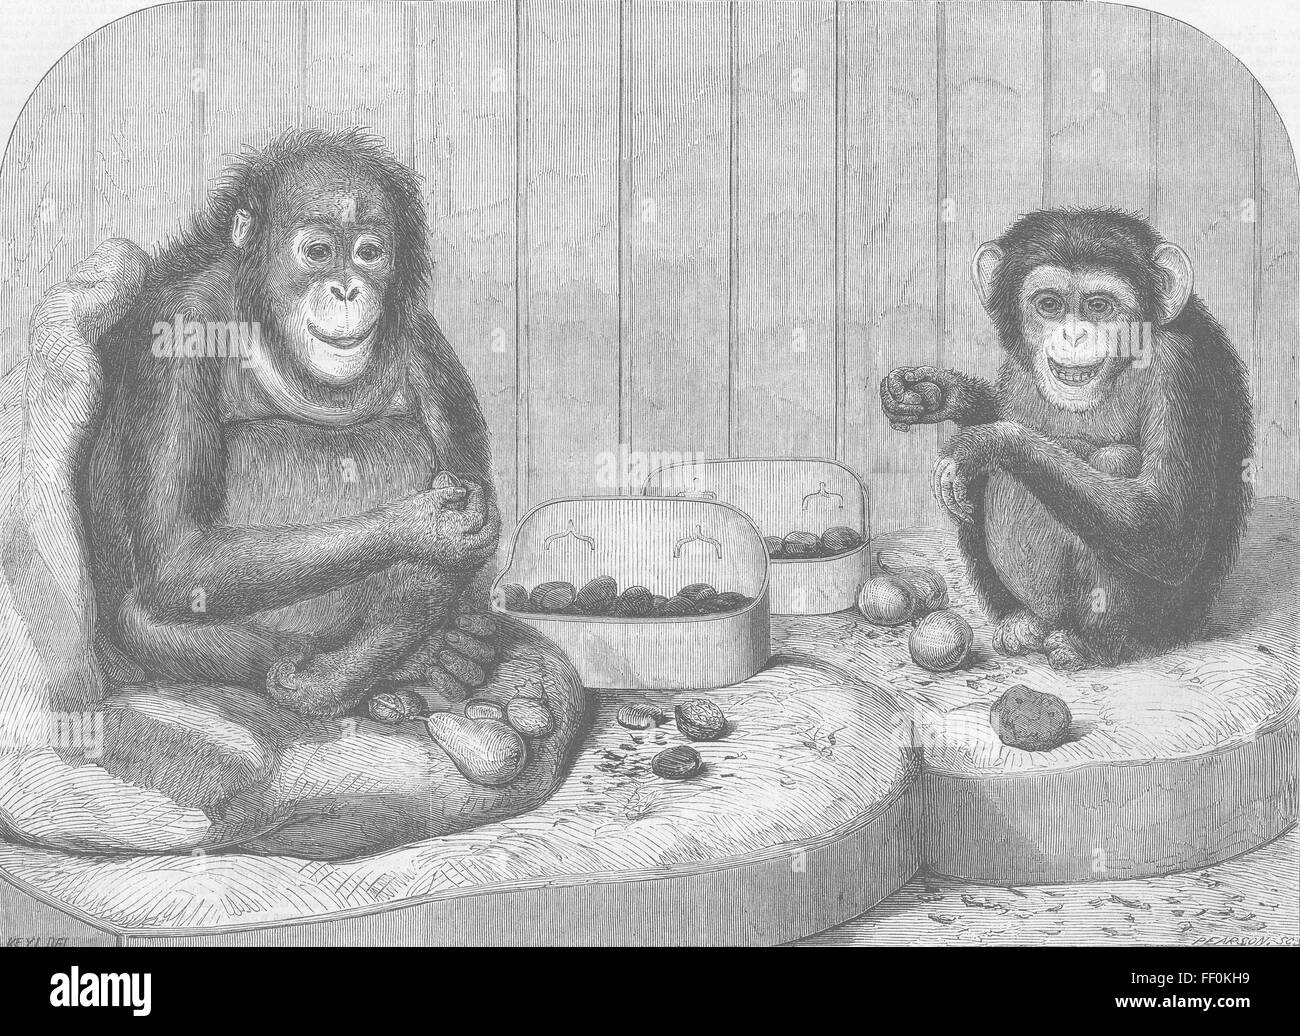 LONDON Chimpanzee & ourang-outang, zoo 1864. Illustrated London News Stock Photo